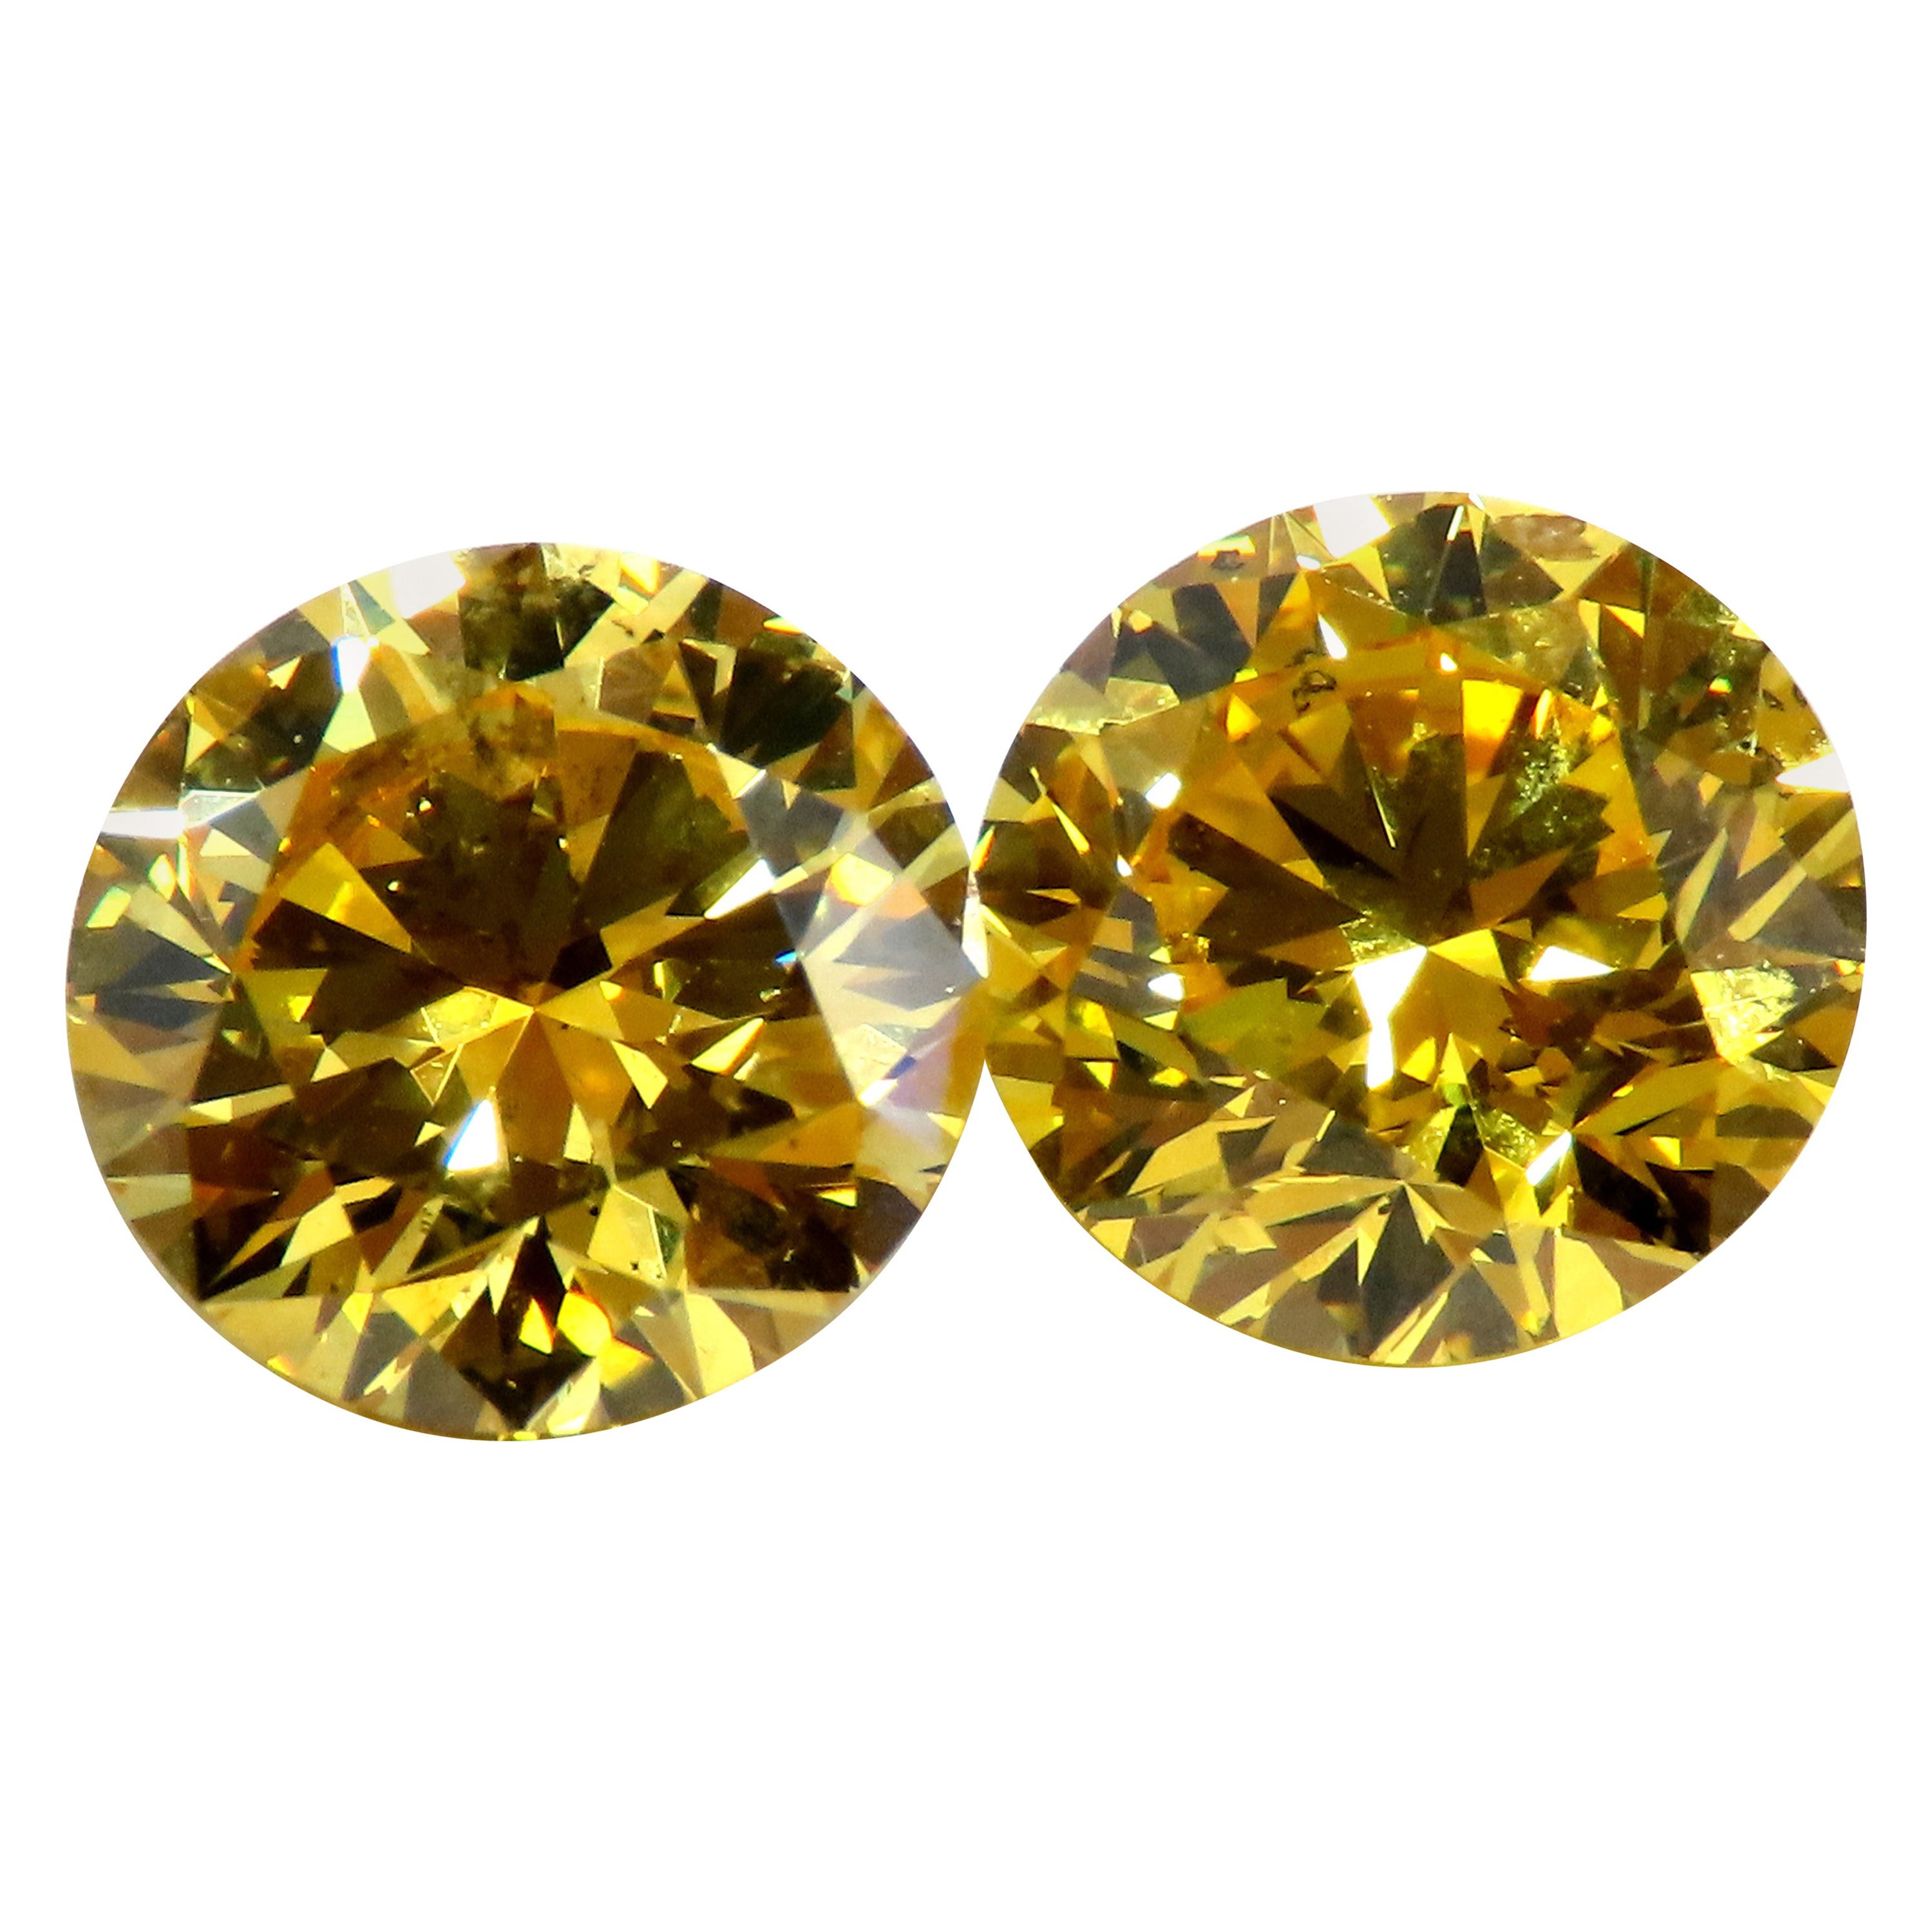 Fancy Vivid Yellow Round Diamonds 4.06ct Gia Certified For Sale